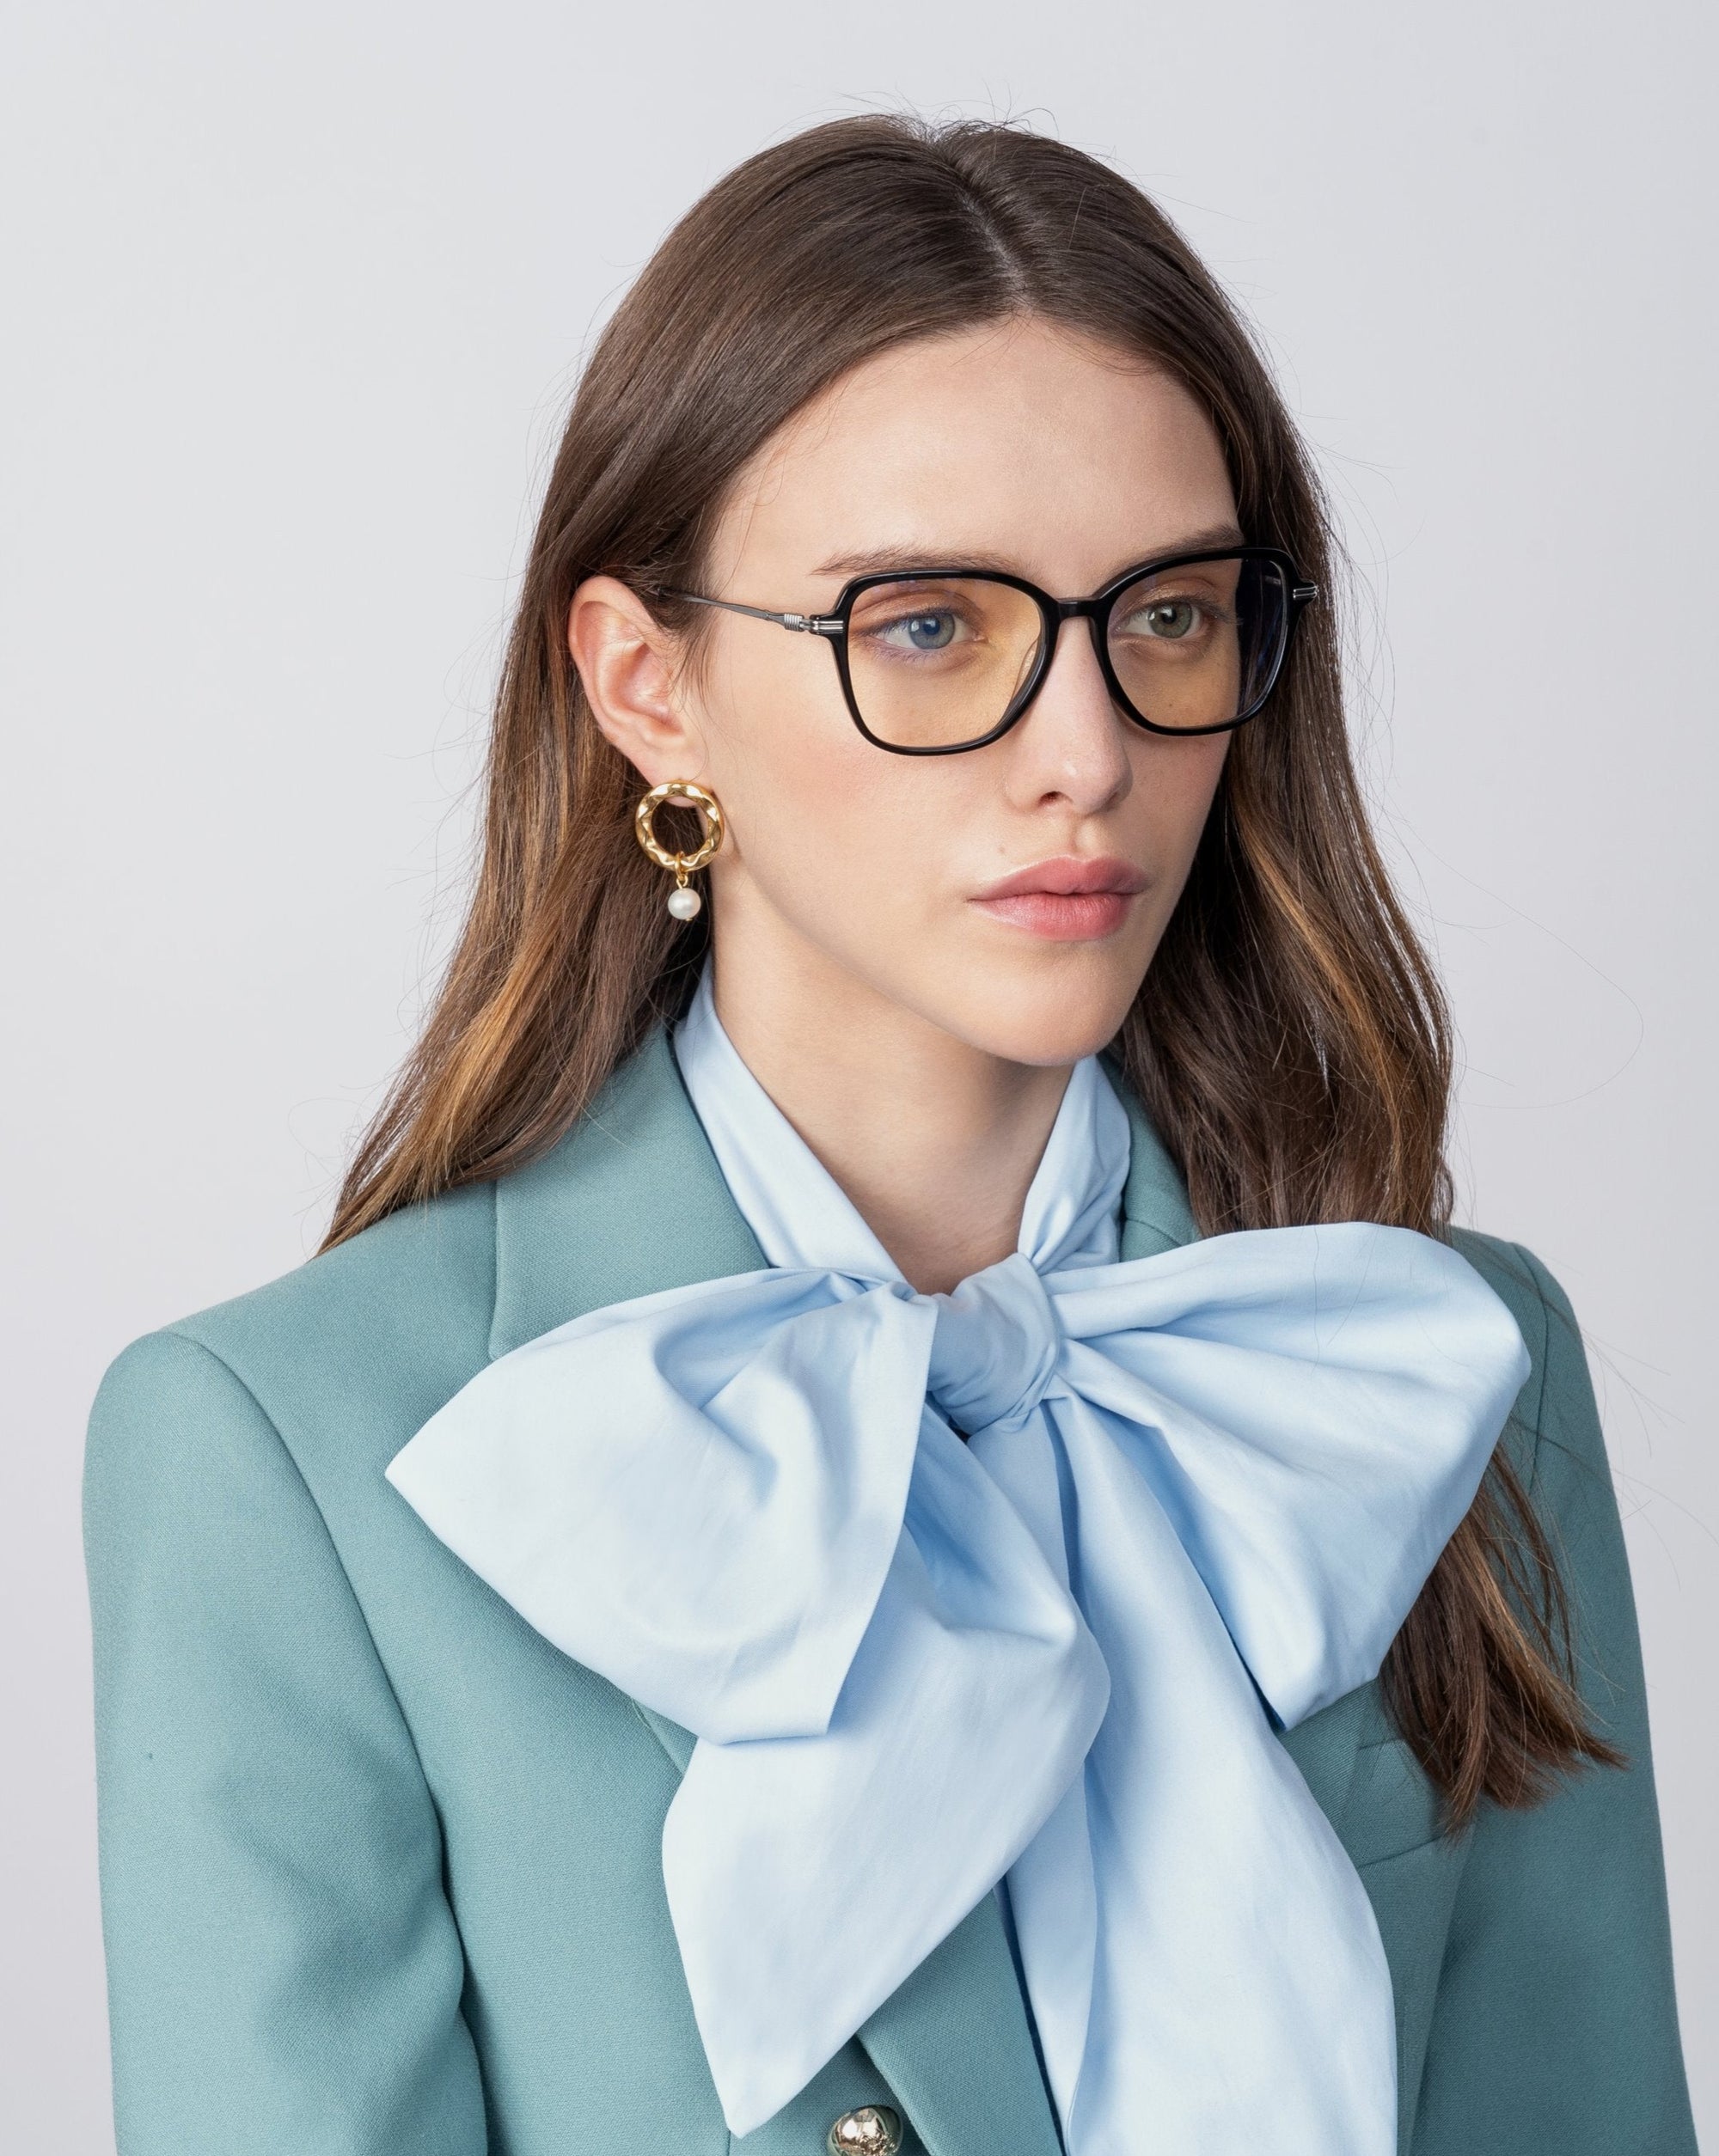 A person with long brown hair is wearing For Art's Sake® Sonnet black framed glasses with blue light filters, gold hoop earrings, and a light blue blouse with a large matching bow at the neck. They are also dressed in a teal blazer with a serious expression, looking slightly to the side.